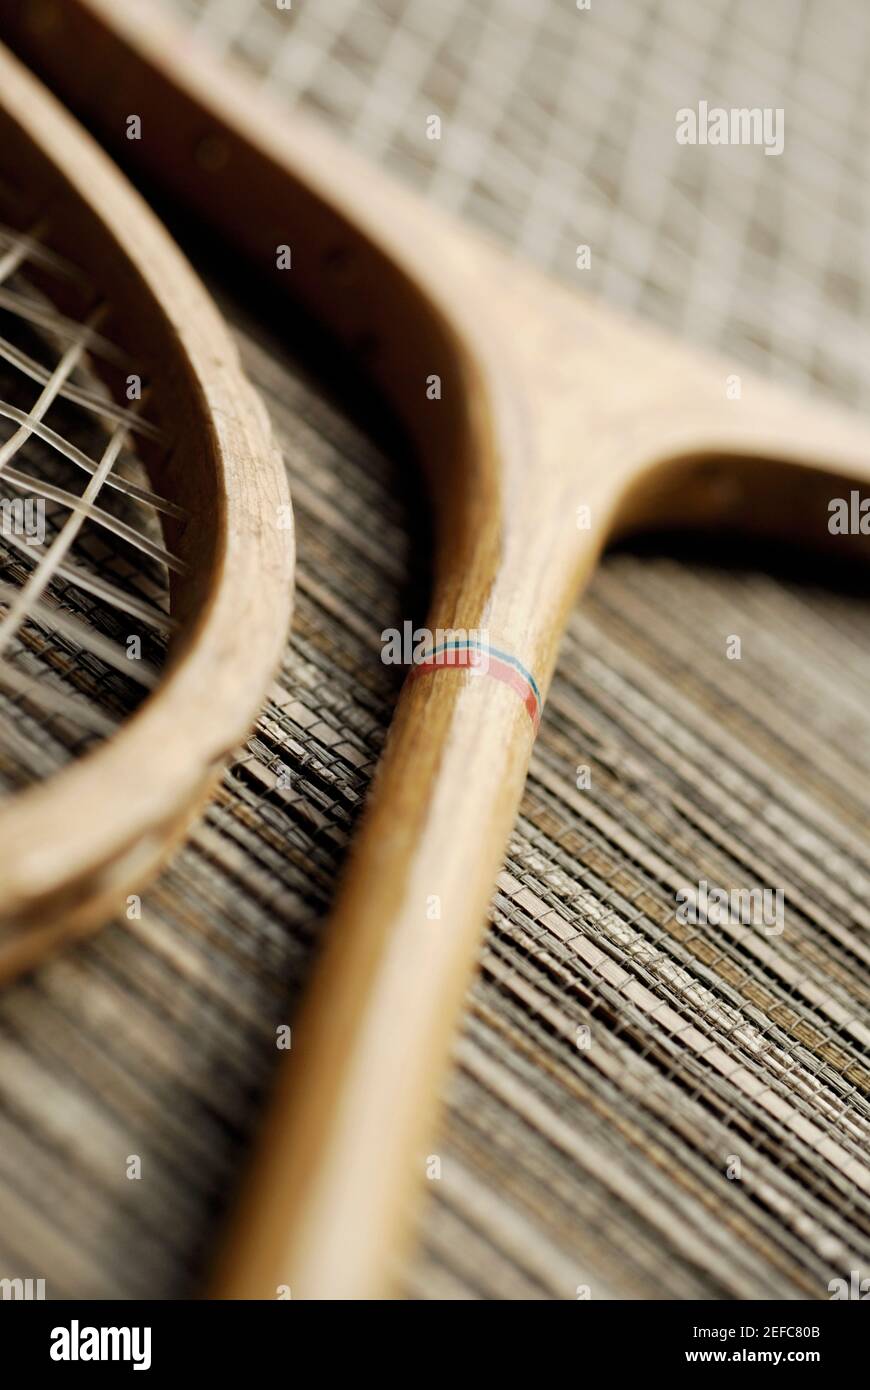 Close-up of two tennis rackets Stock Photo